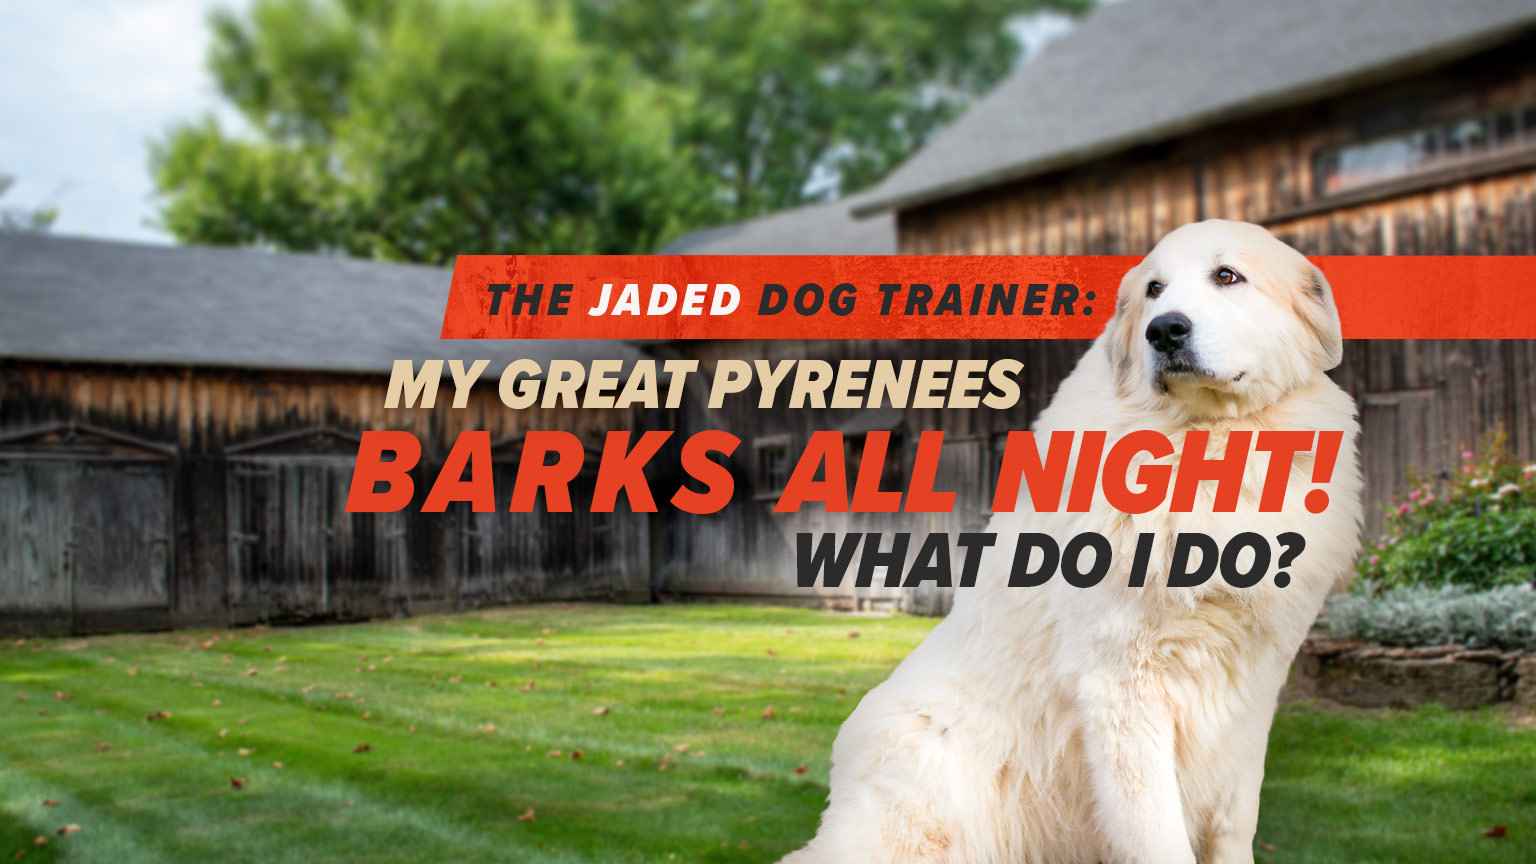 do great pyrenees pant a lot